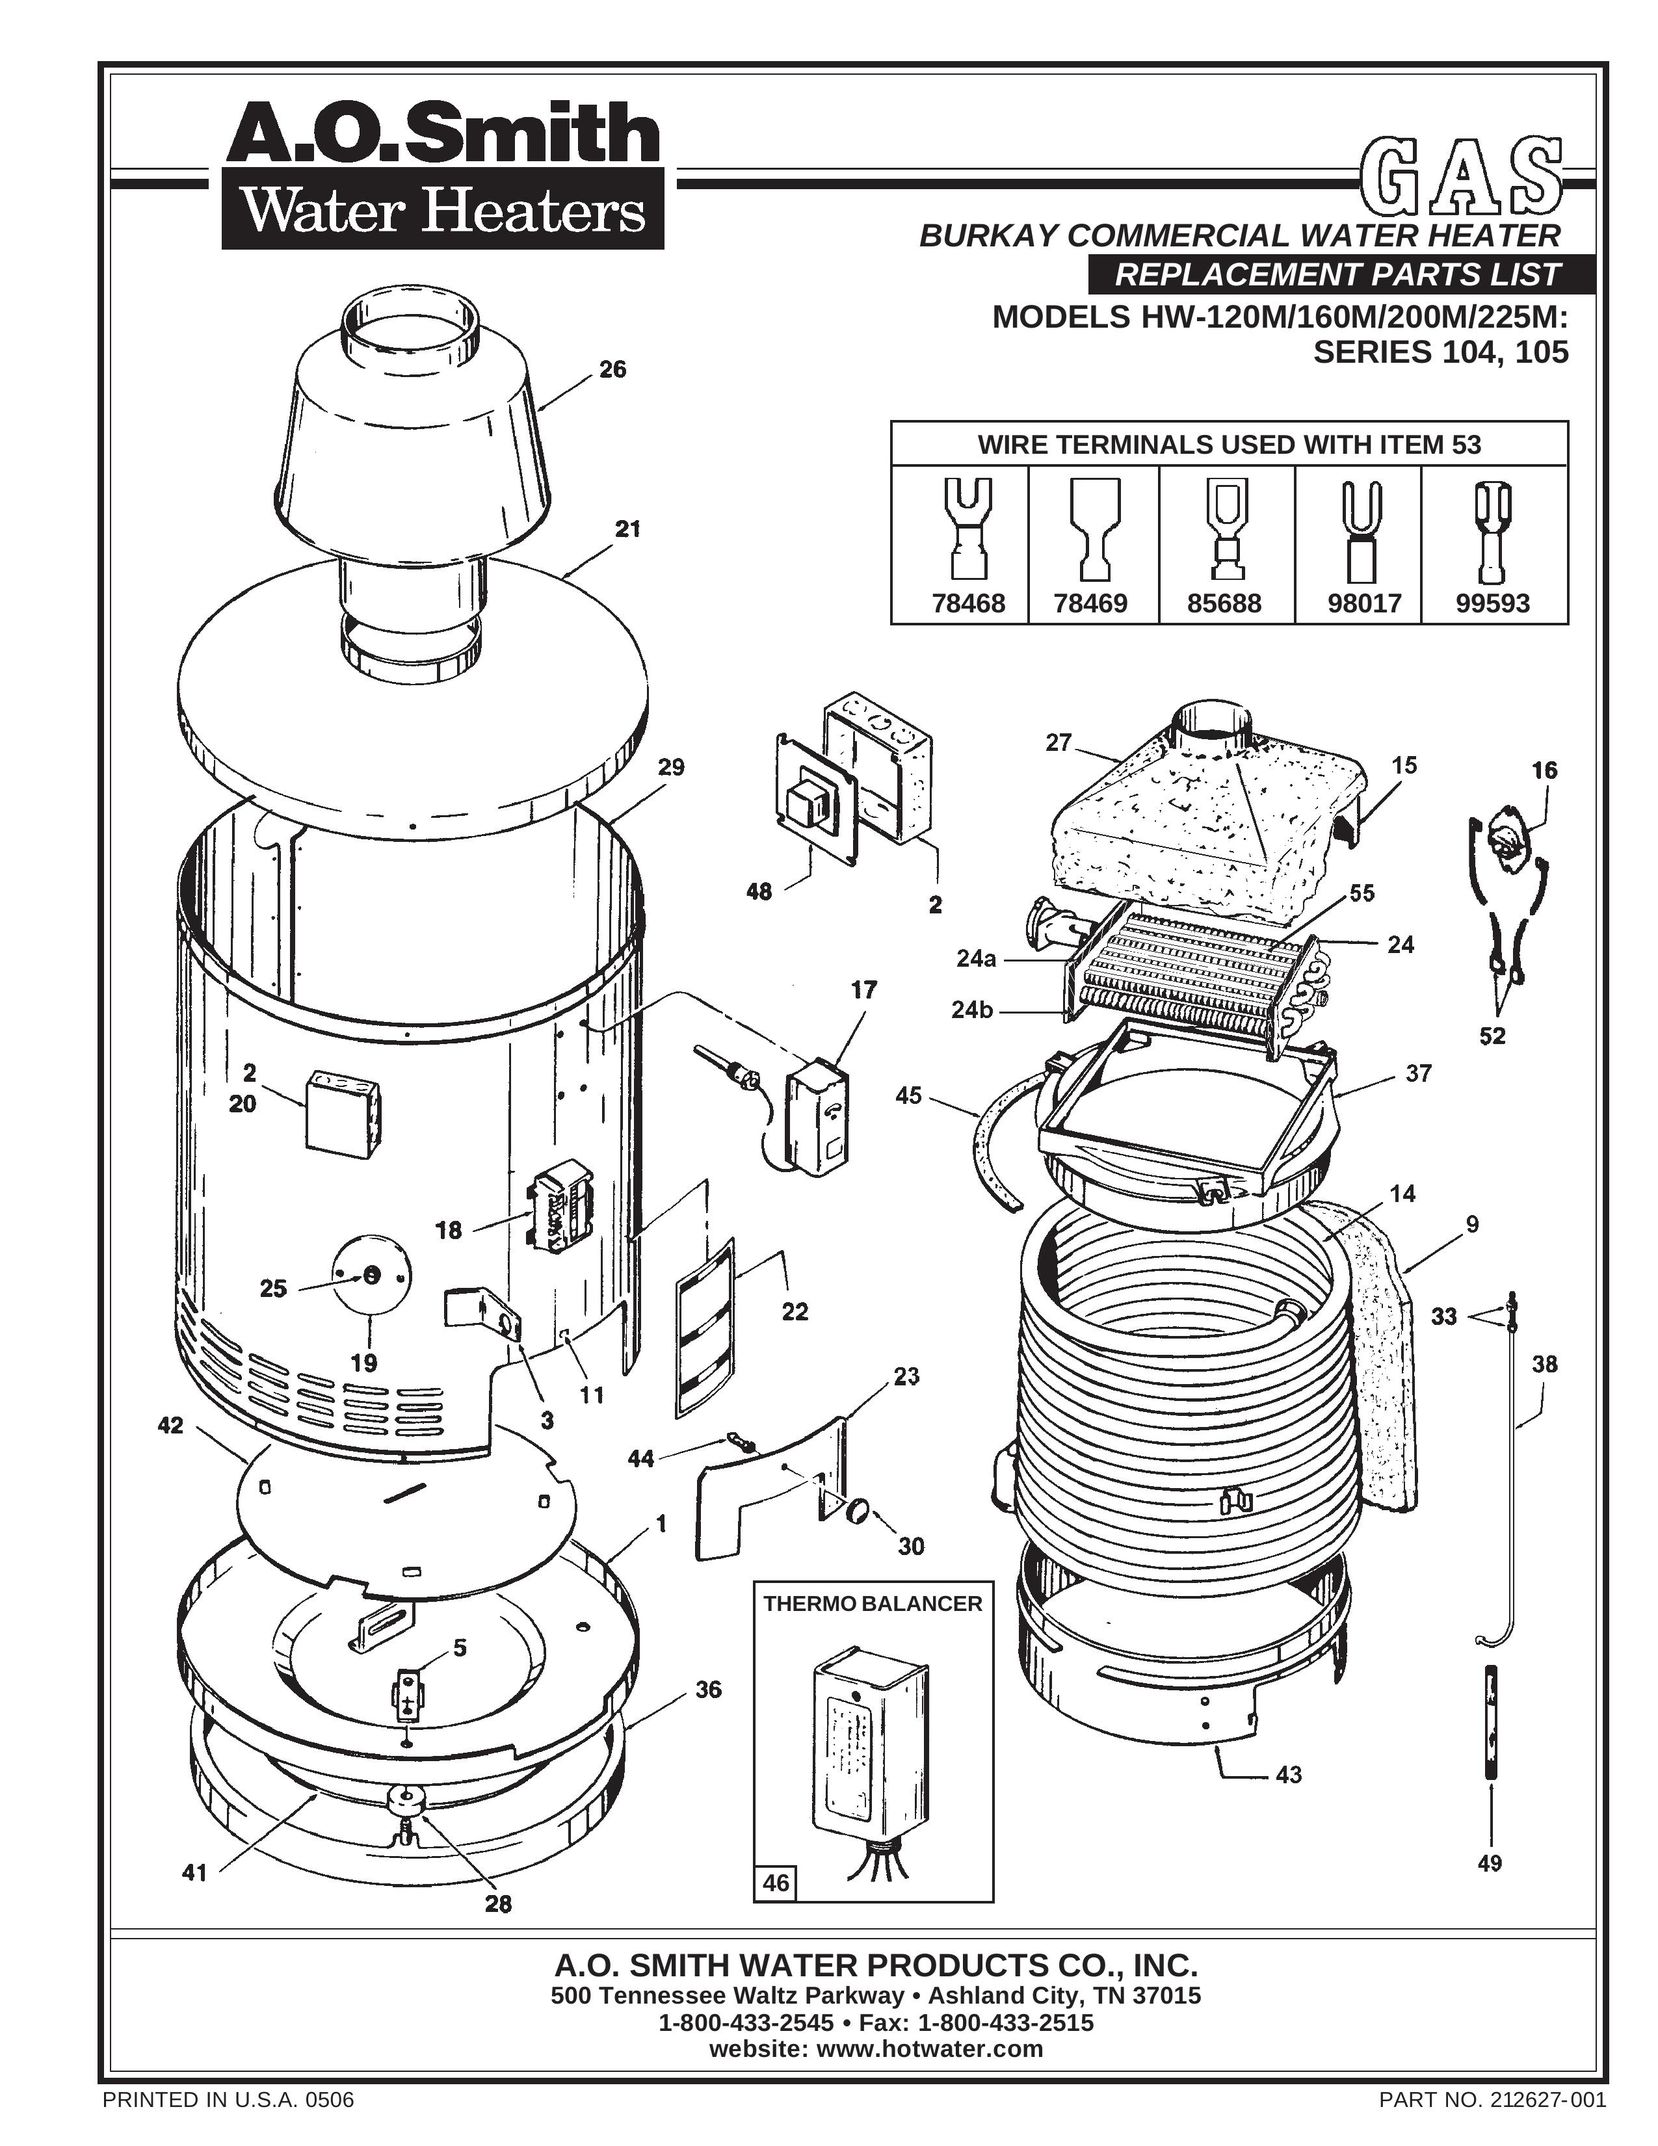 A.O. Smith 105 Series Water Heater User Manual